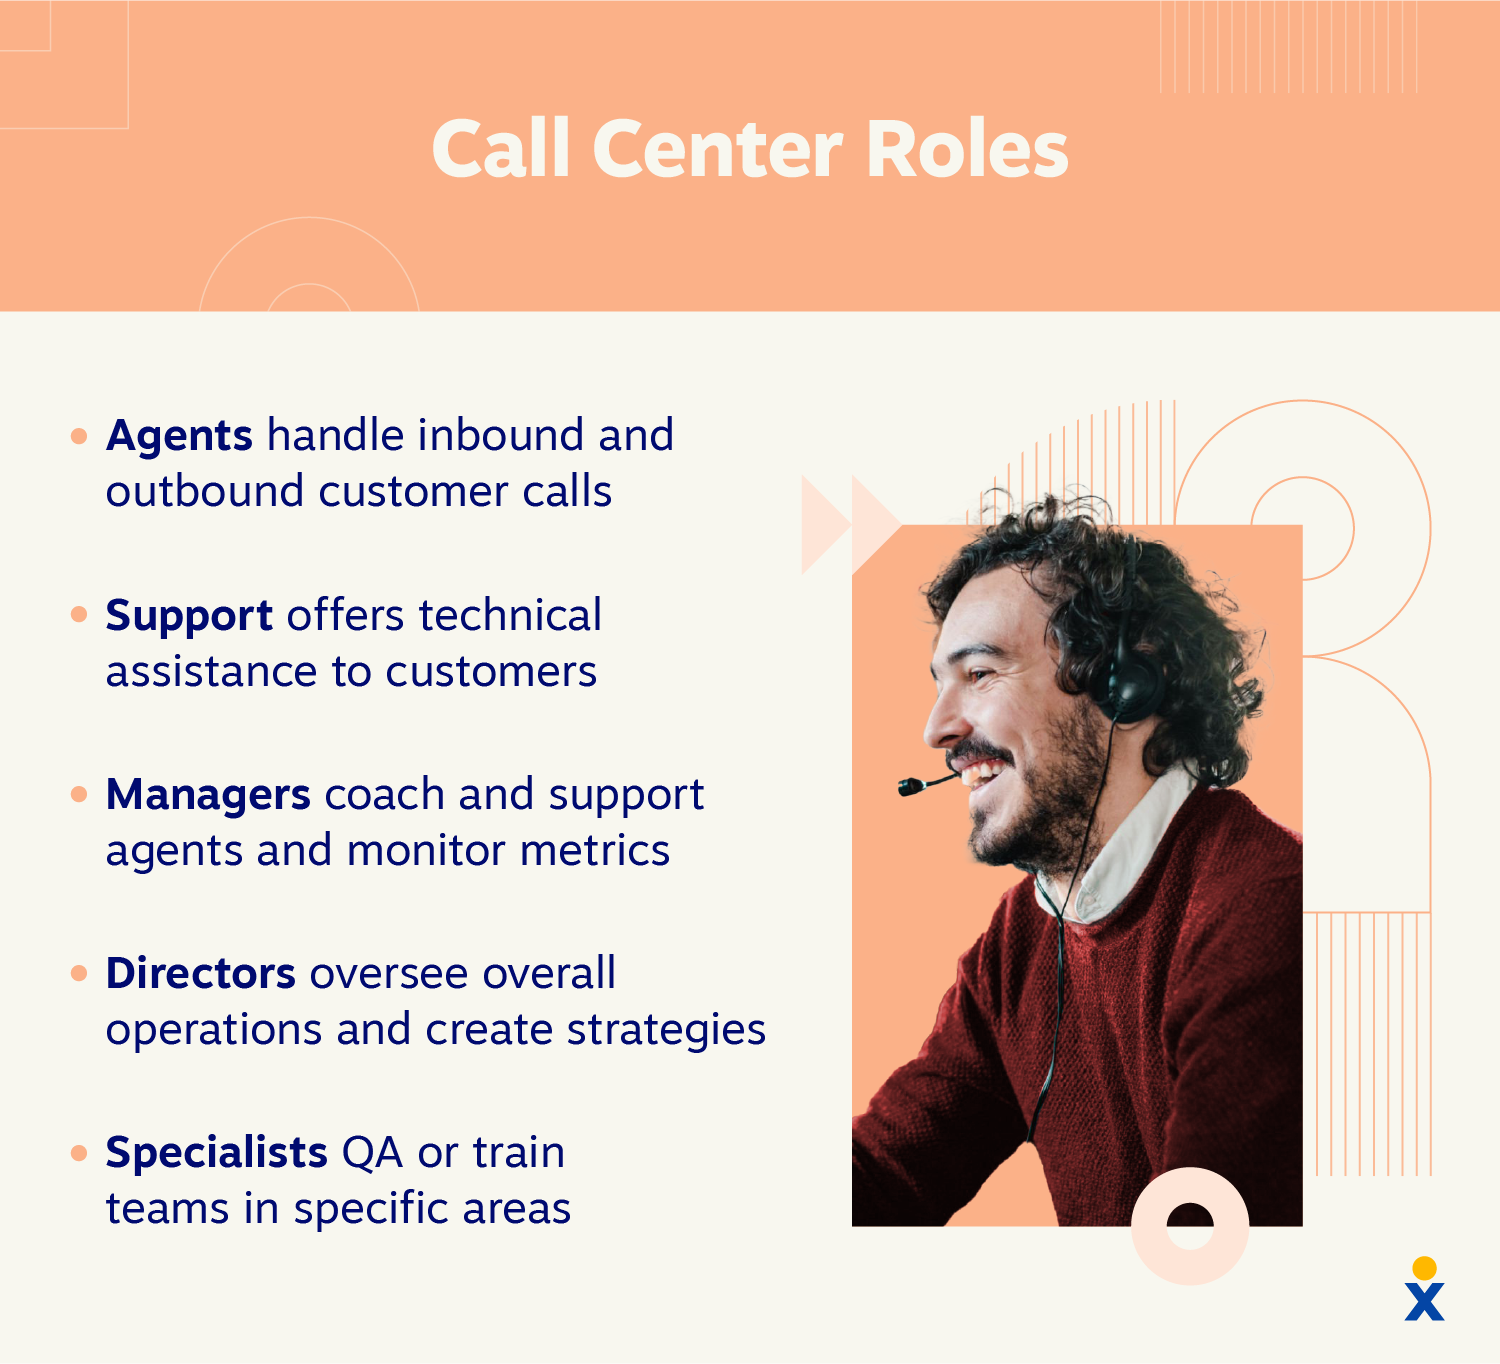 The different categories of call center roles including agents, customer service support, managers, directors, and specialists